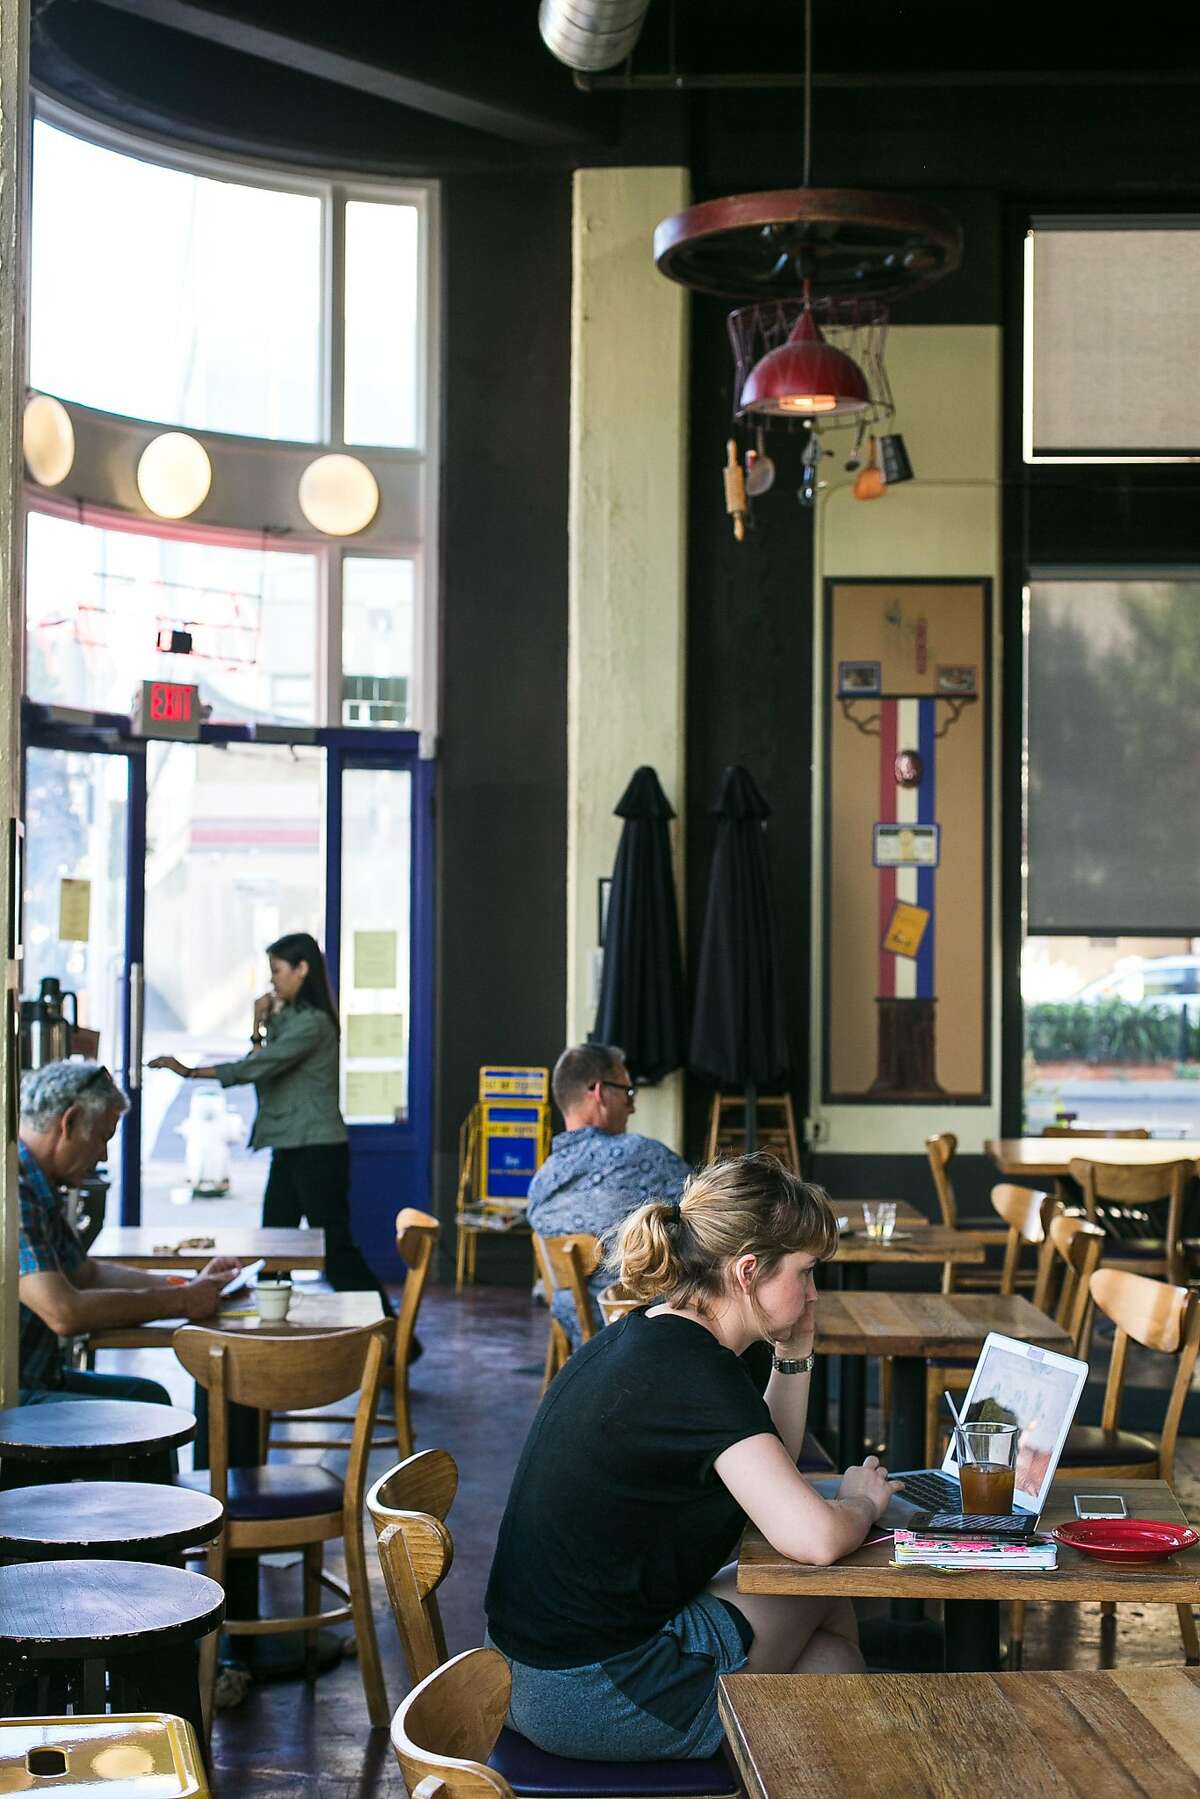 A quiet cafe, Sweet Bar Bakery, offers pastries, tea, coffee and more as part of the Hive's new food establishments in Oakland.